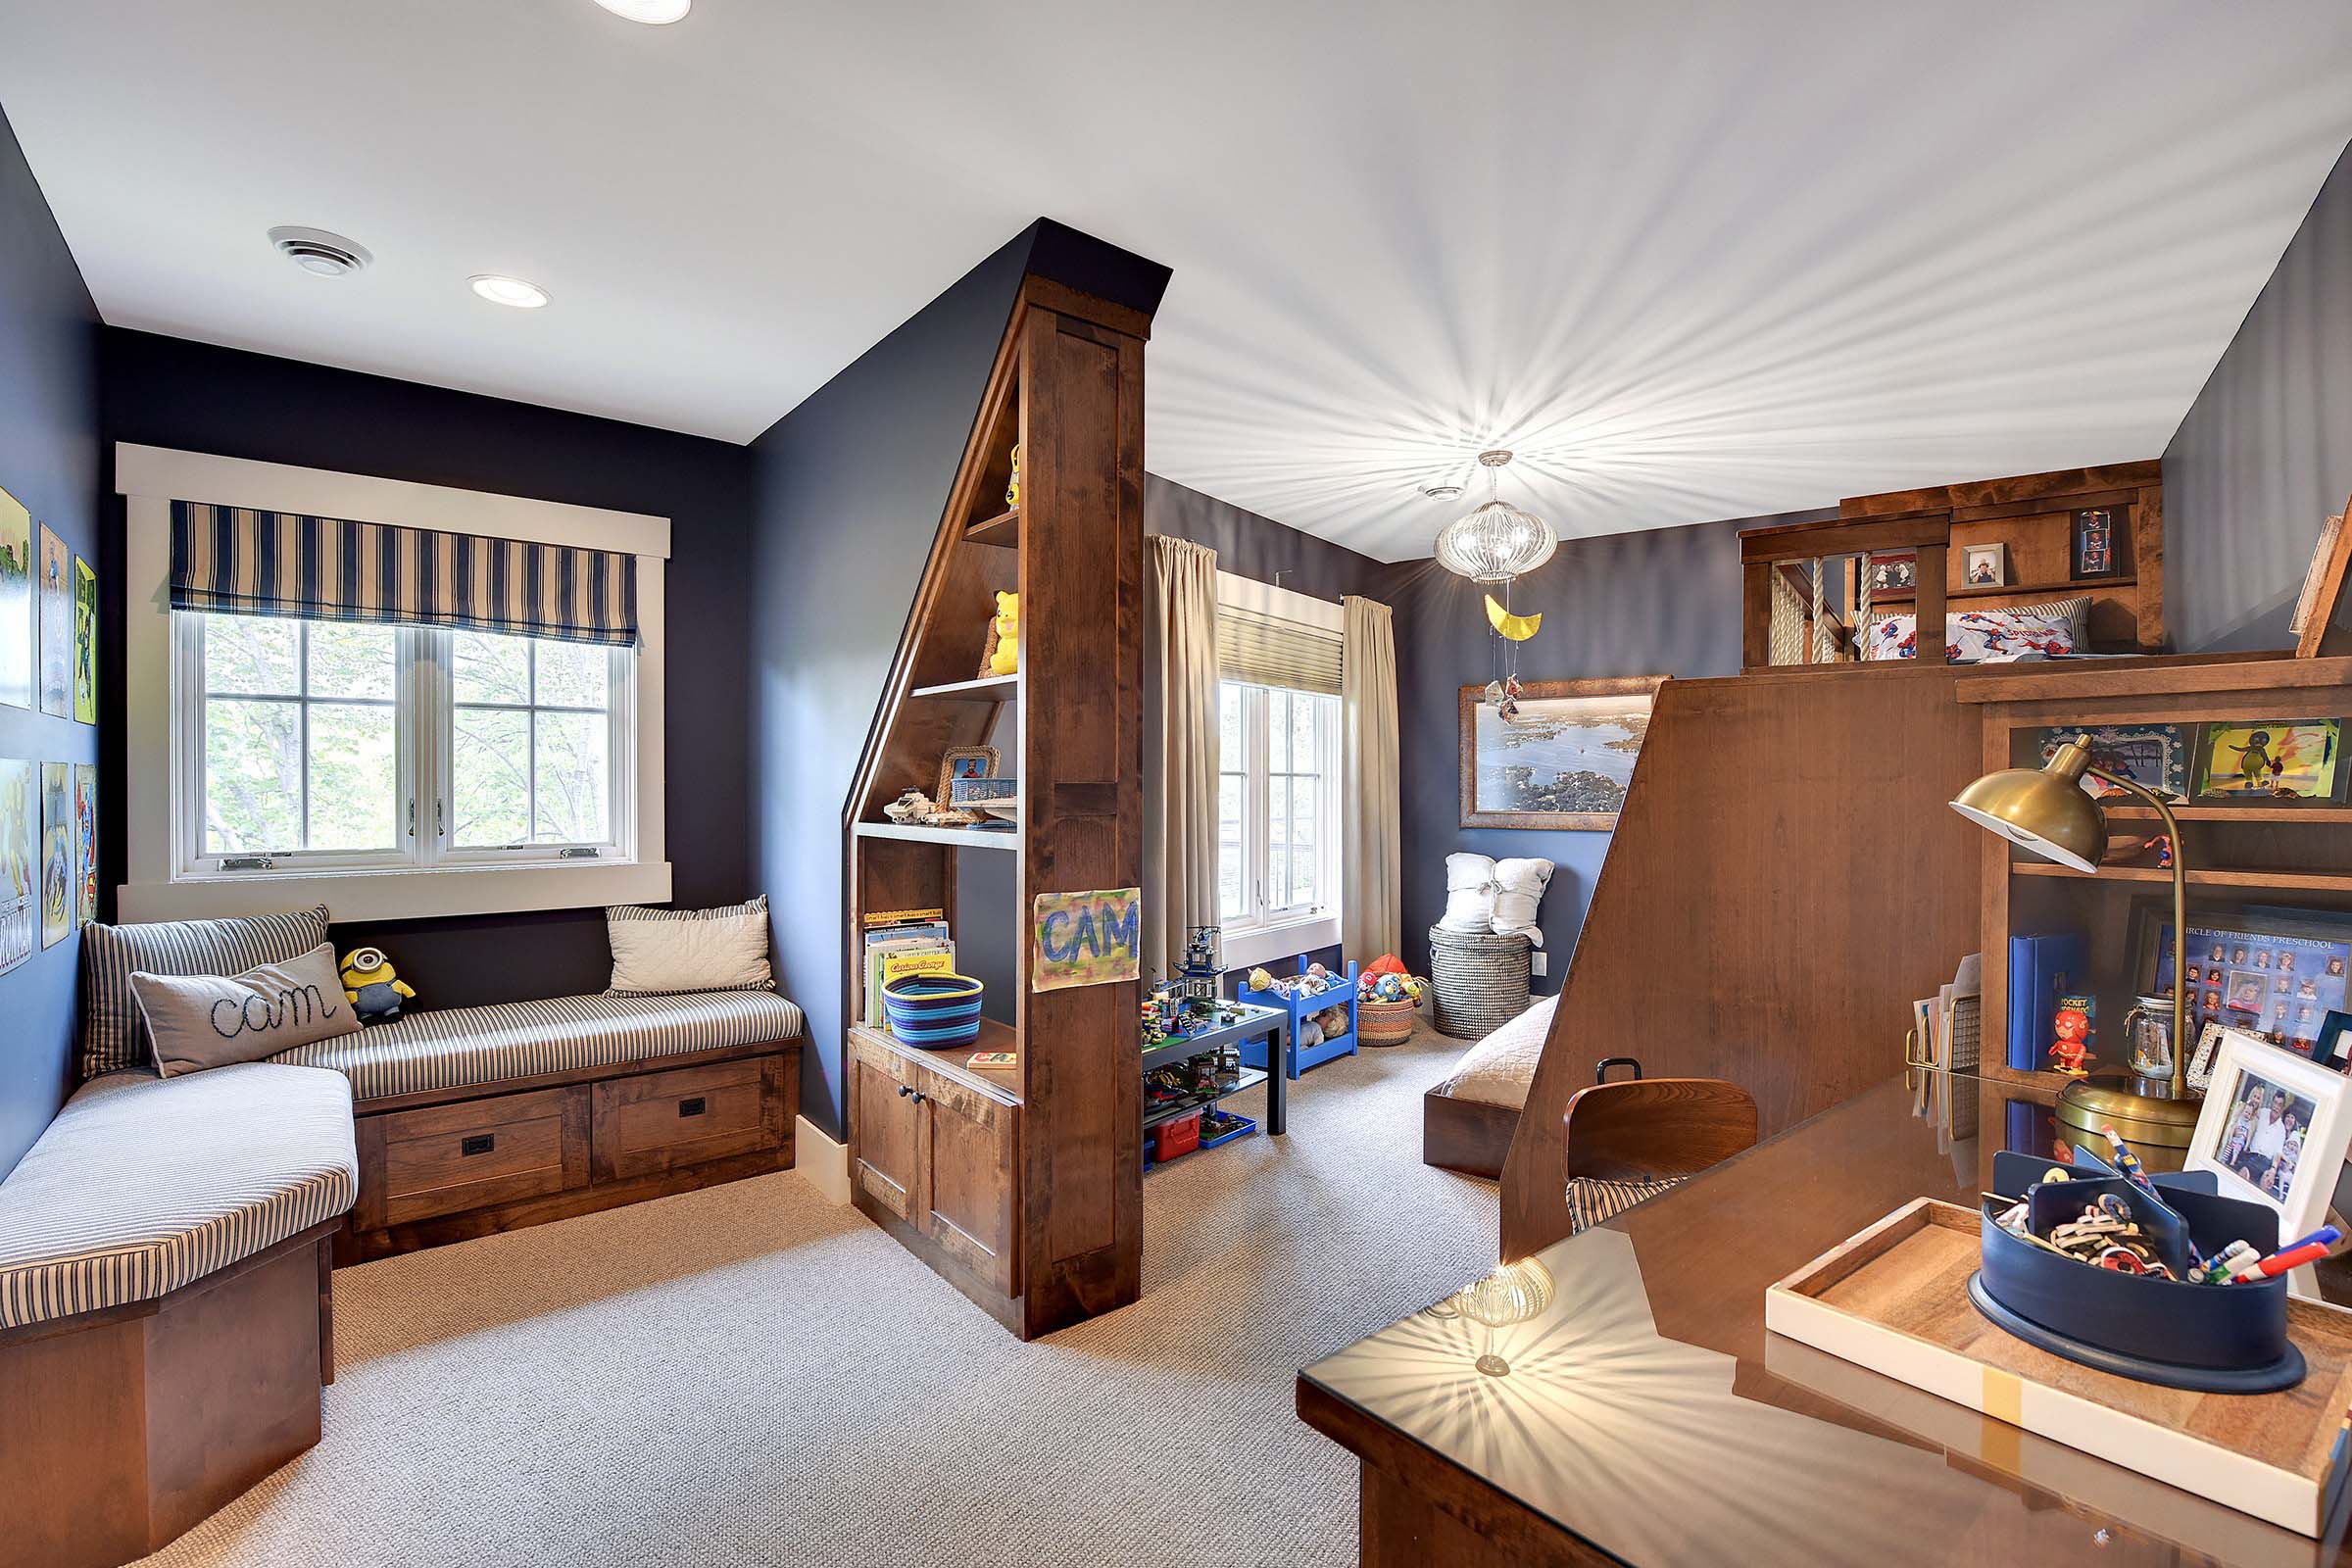 A boy's room with a bed and a desk, showcased in our portfolio.